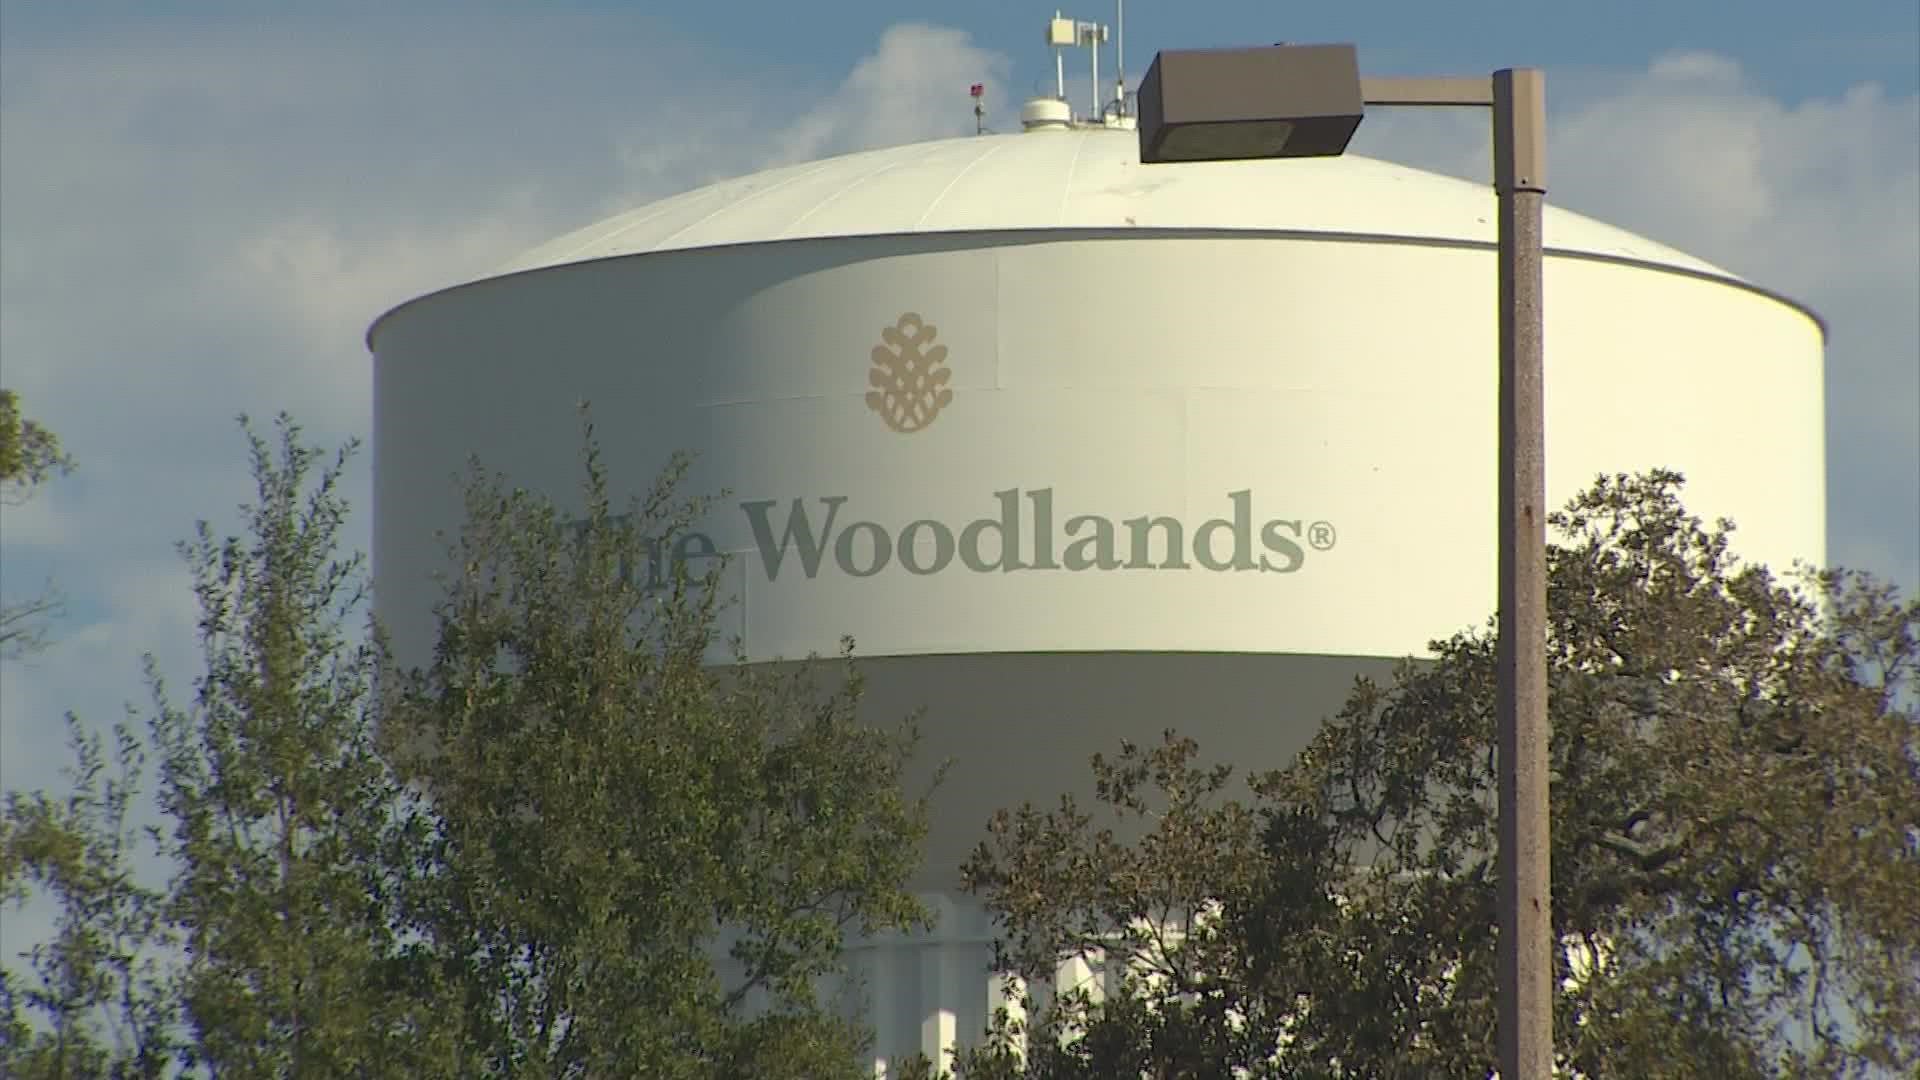 No other city was able to cut down The Woodlands for the second straight year, according to Niche.com's rankings.